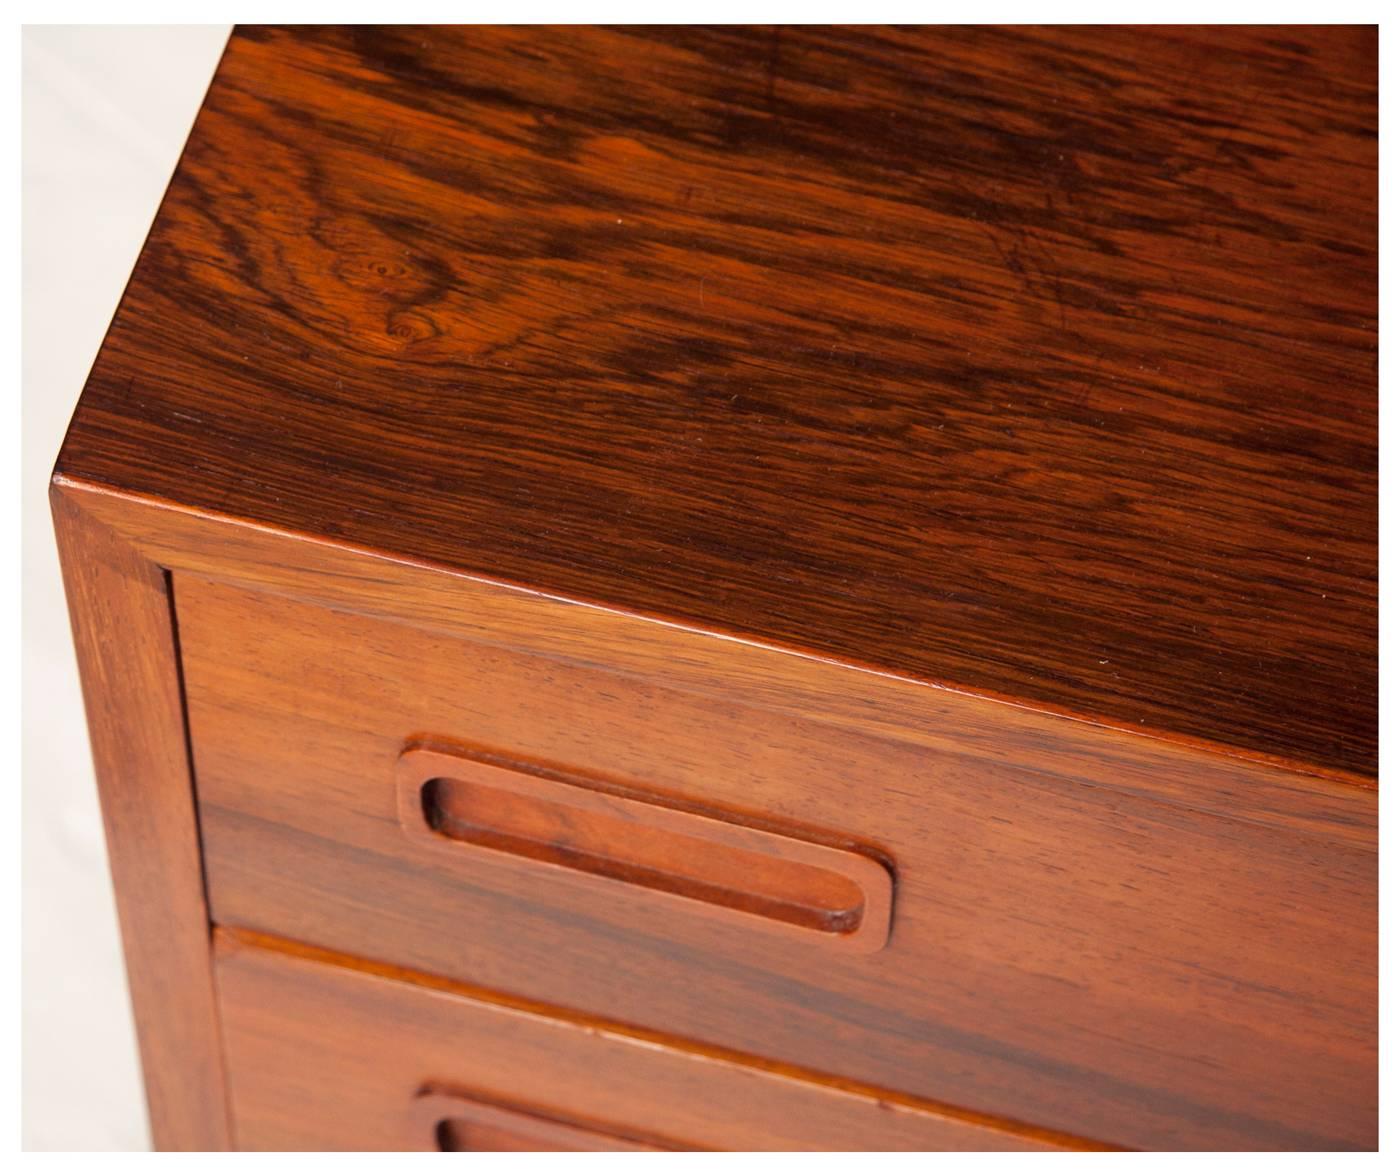 Four-drawer rosewood sideboard with stunning grain. Stamped with makers mark. Made in Denmark.